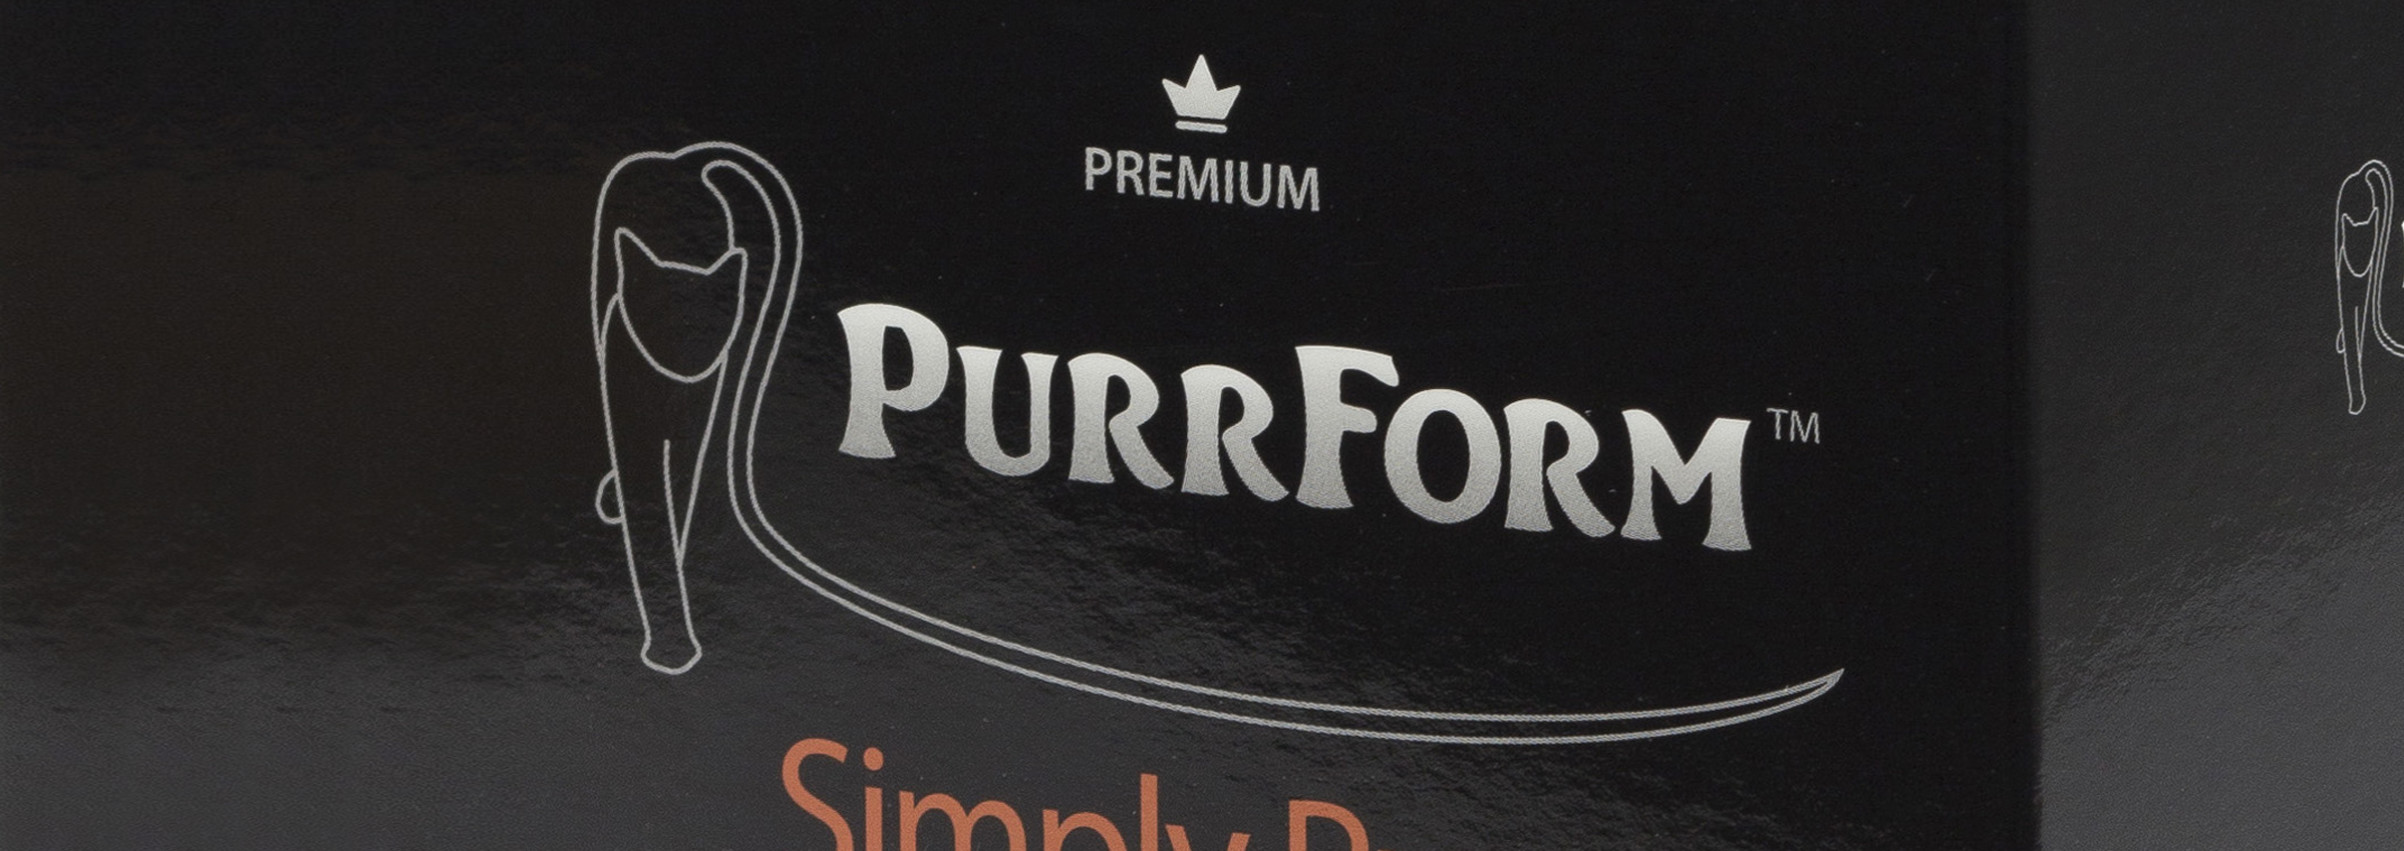 Purrform packaging close up